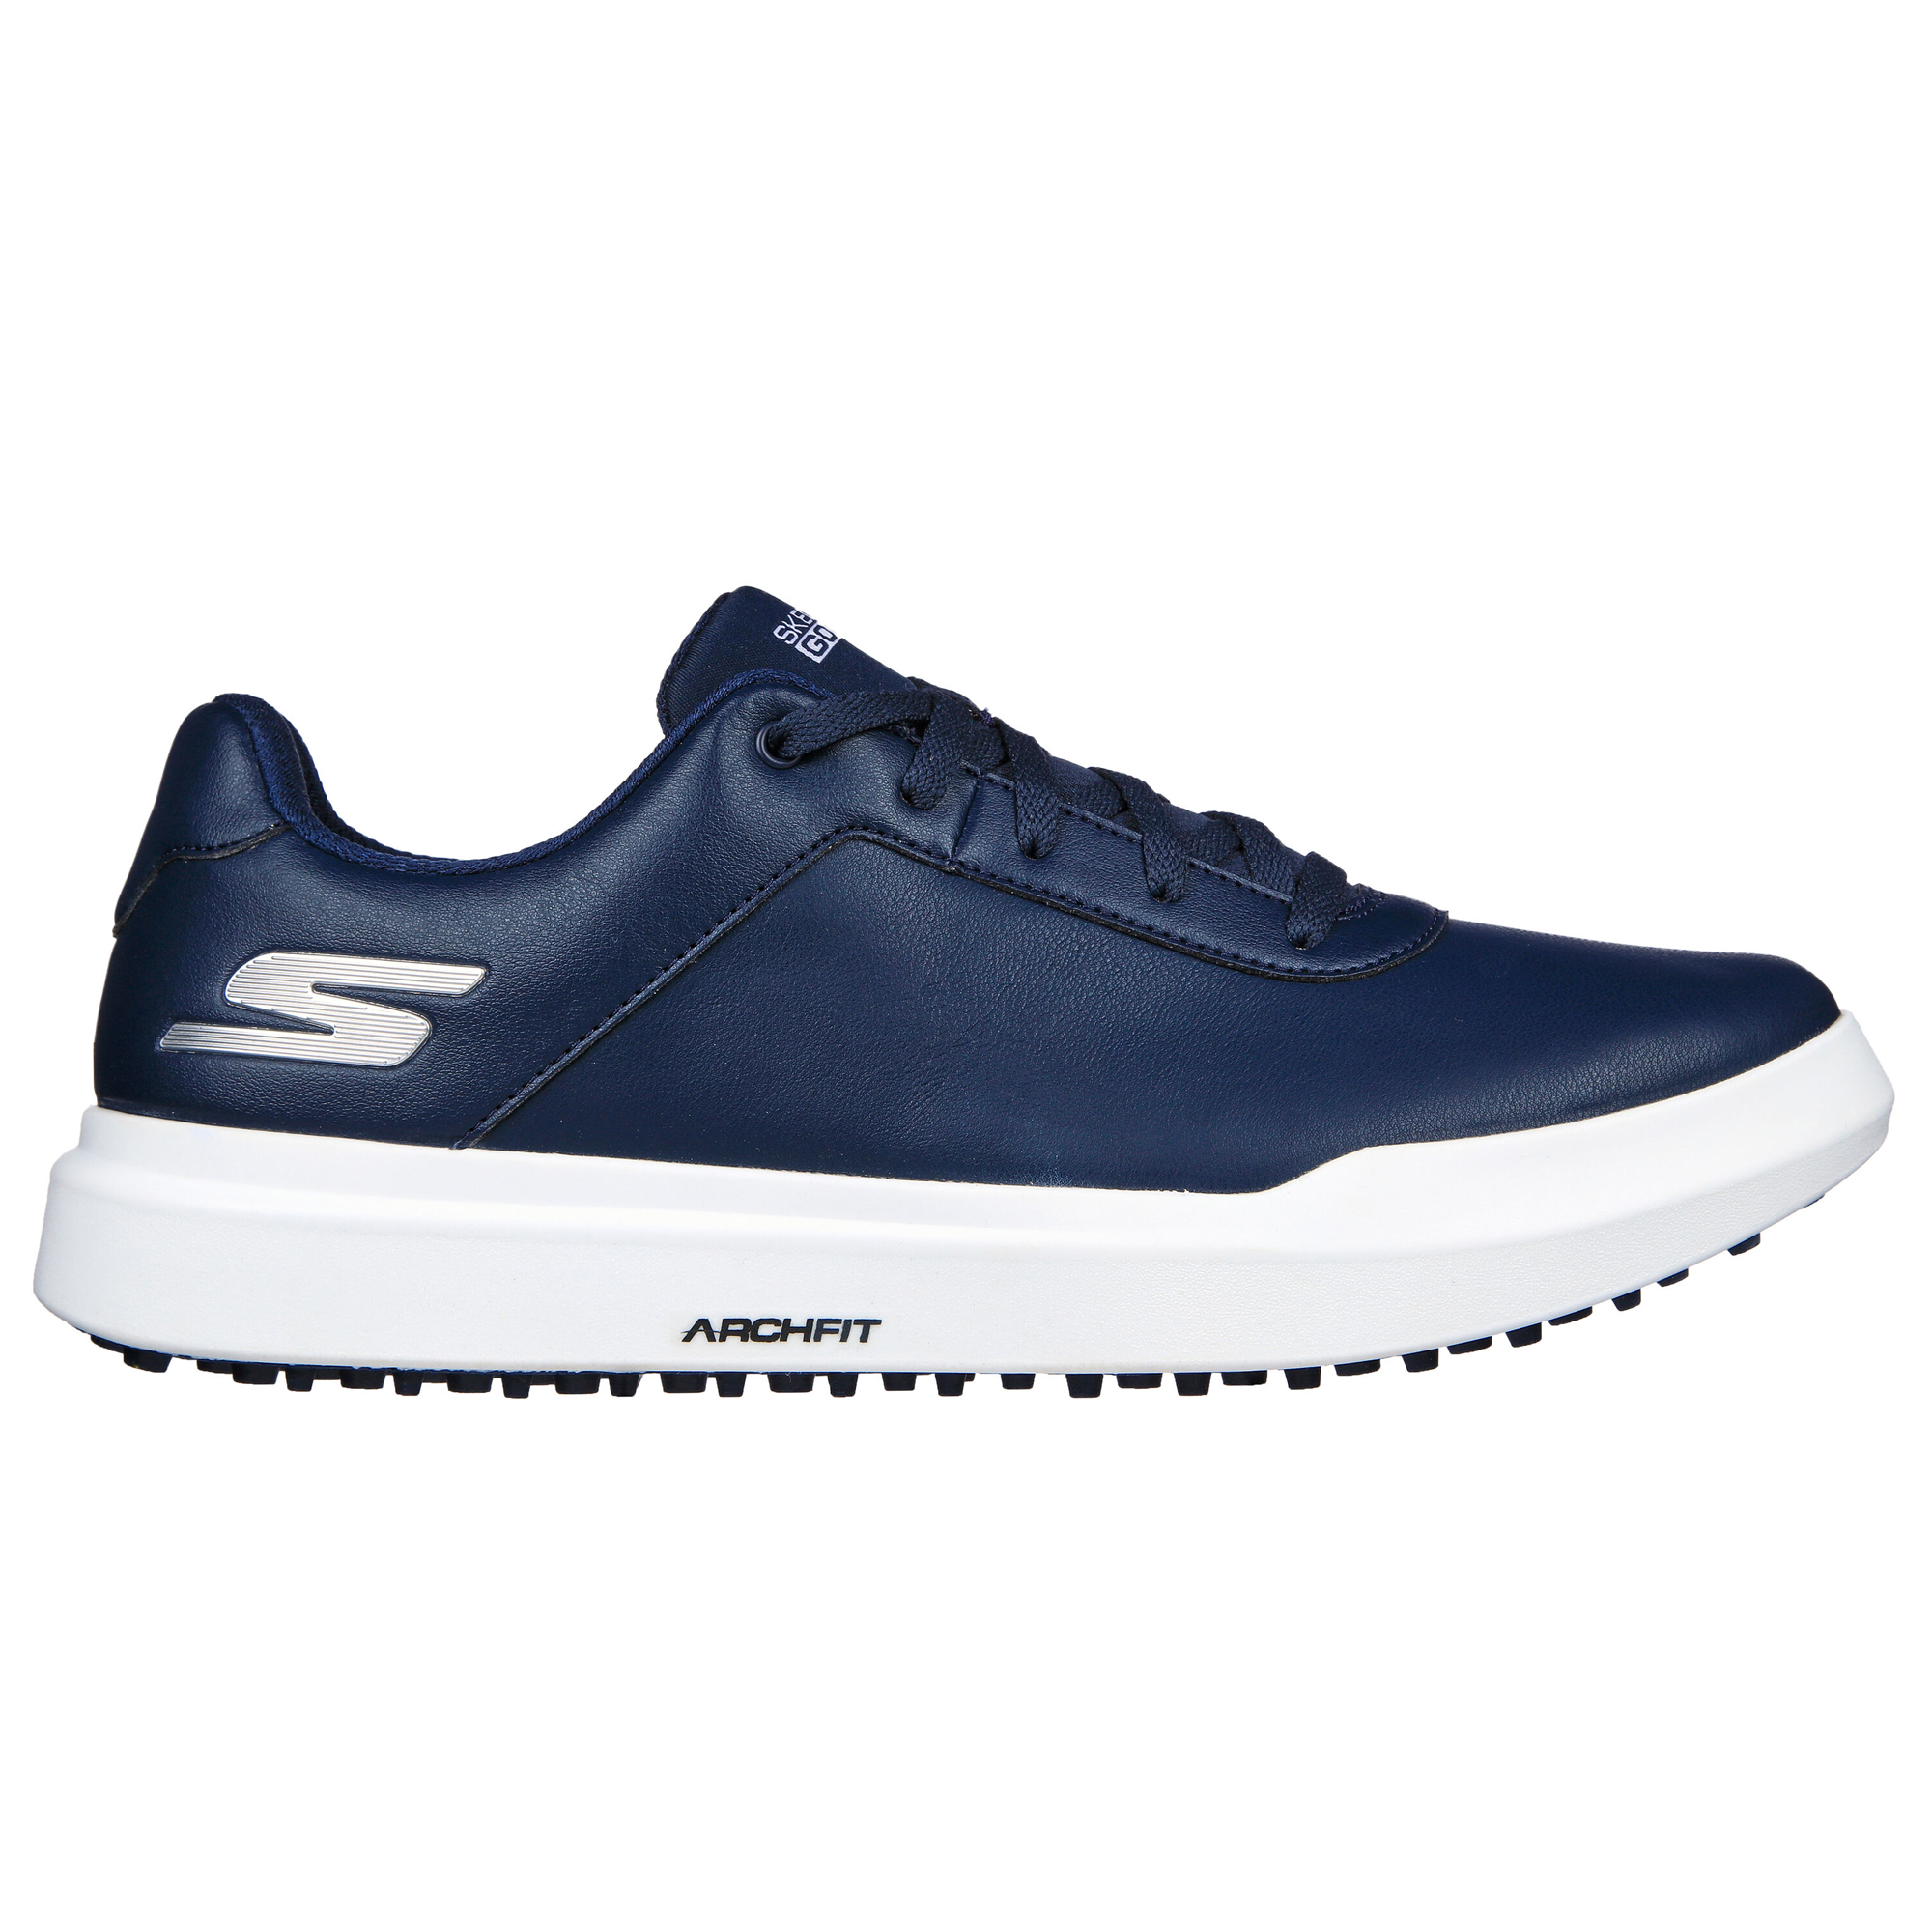 Skechers Go Golf Drive 5 Mens Spikeless Golf Shoes  - Navy/White